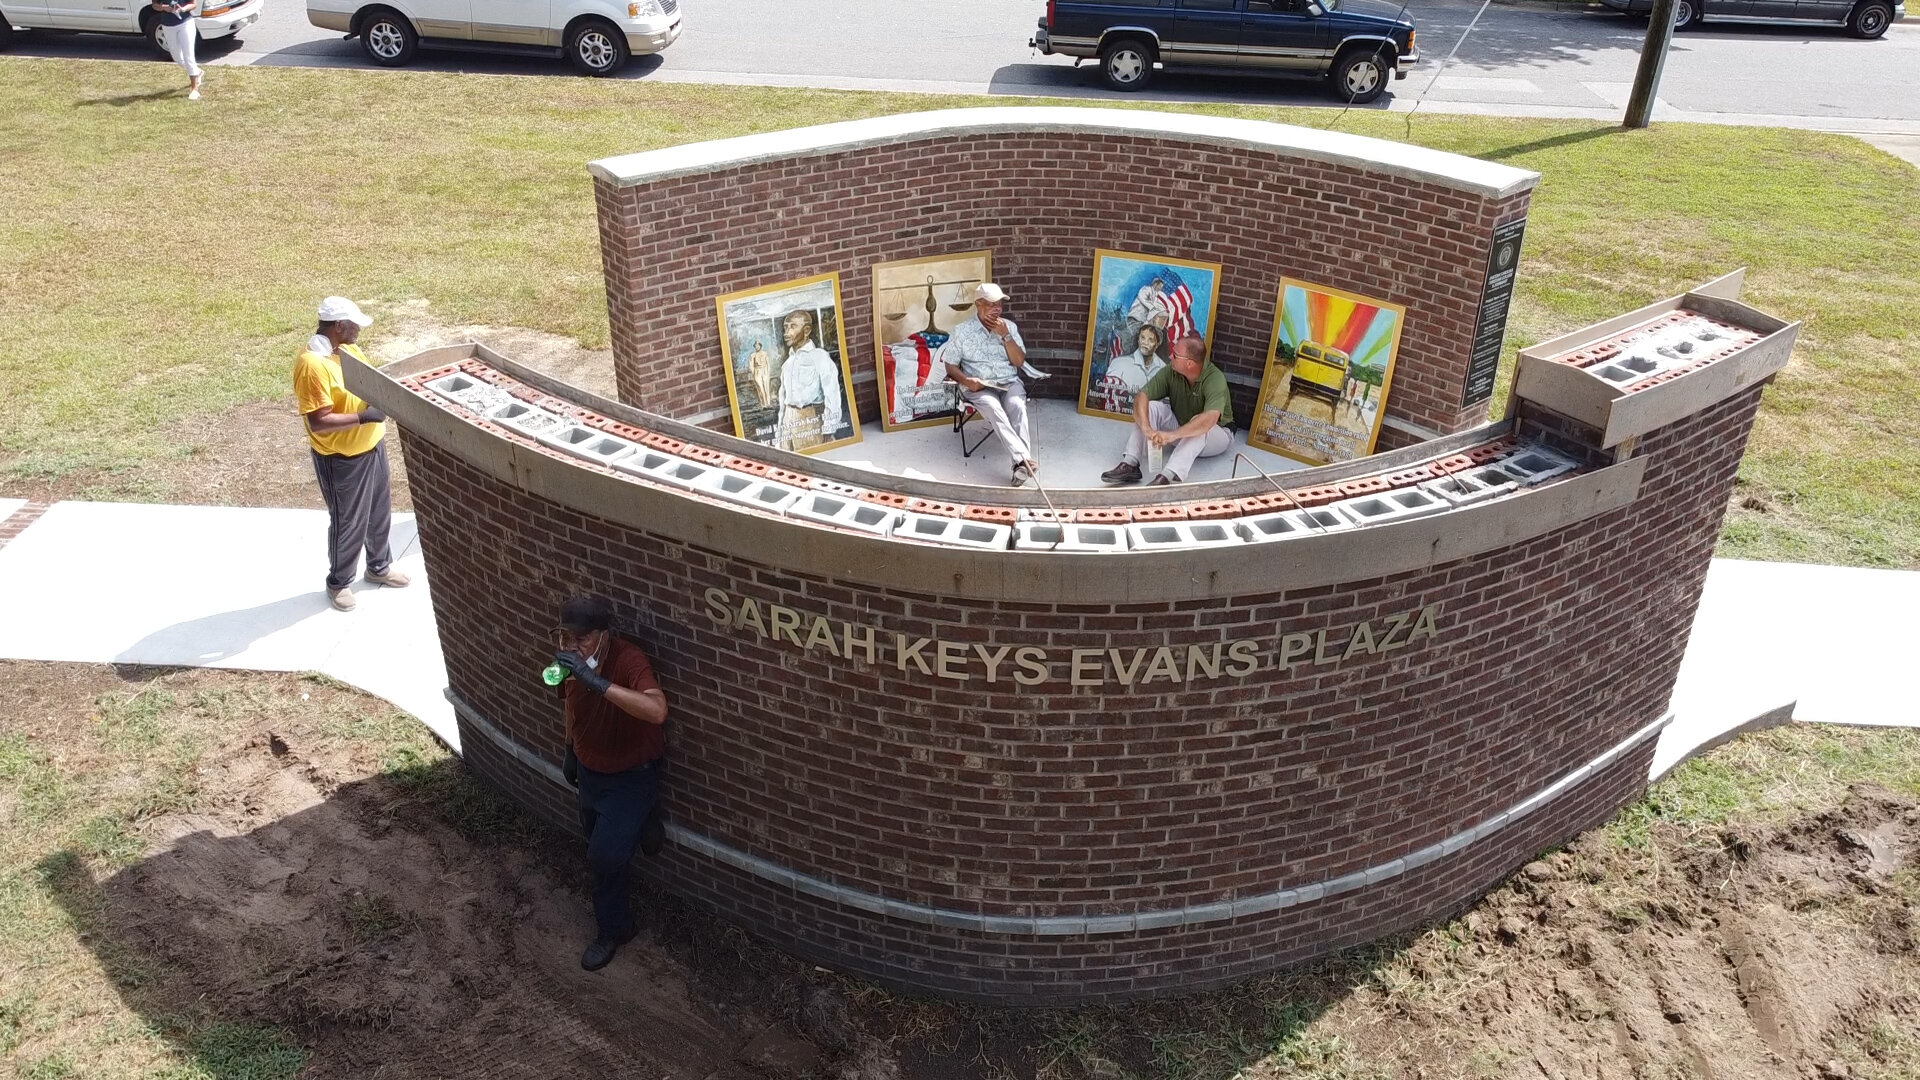  Sarah Keys Evans Plaza is near completion. Stay tuned and check back soon for the final reveal of the finished artwork!  Photo courtesy of Morgan Potts  